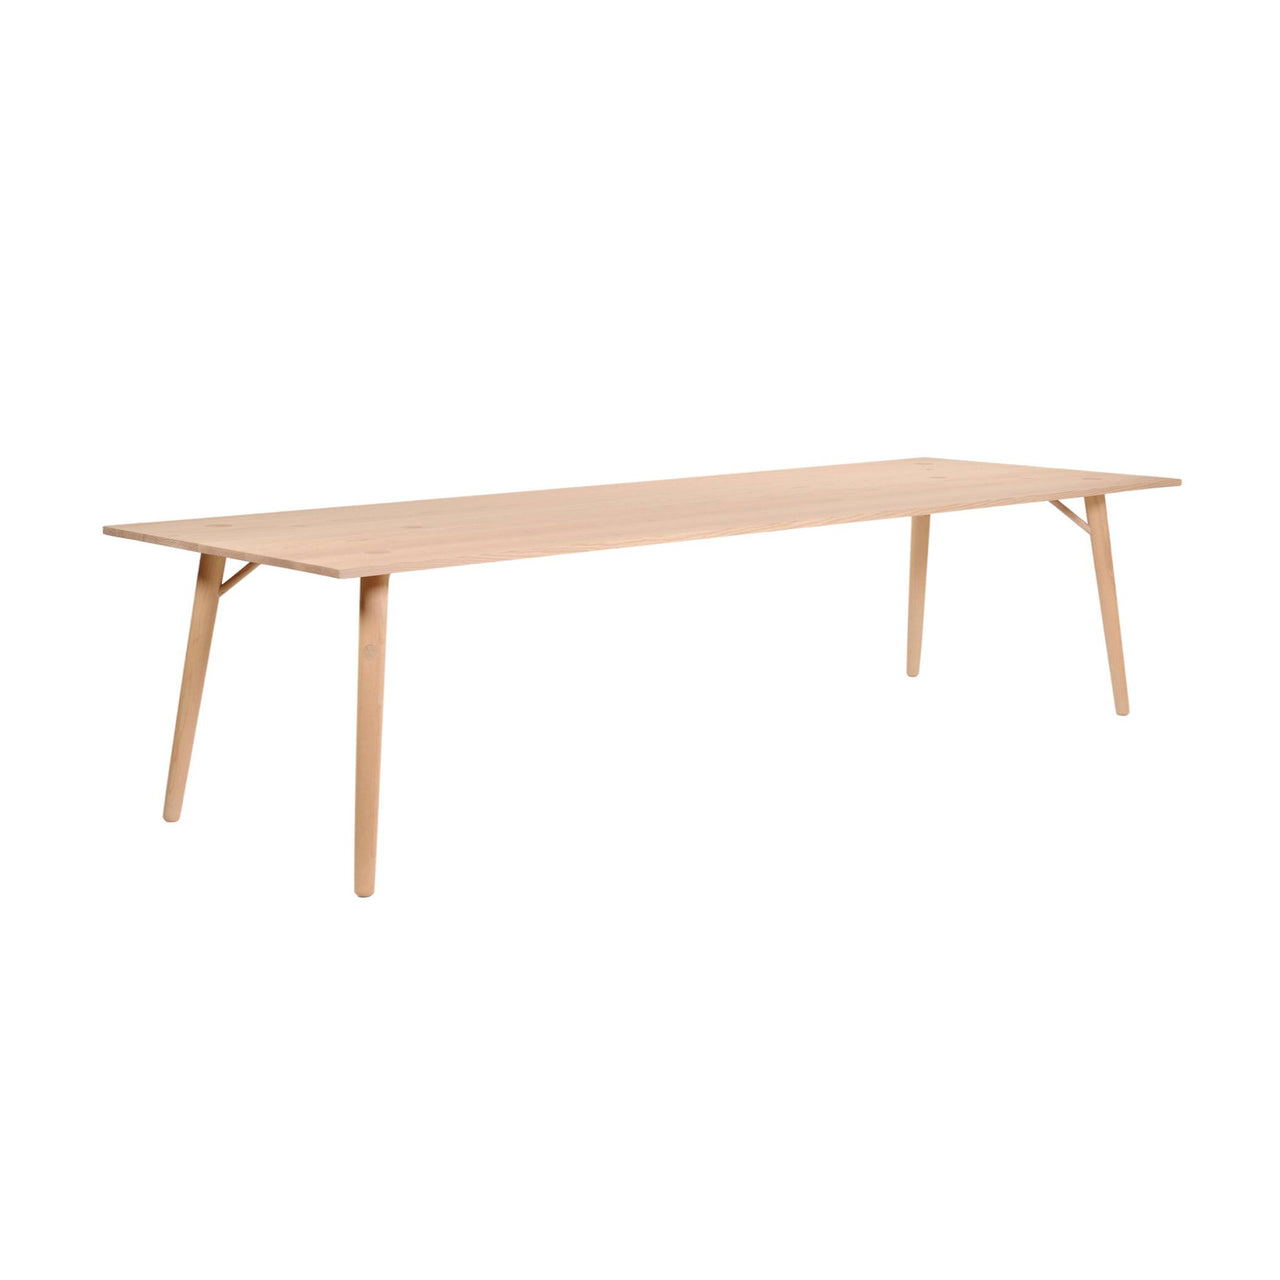 Branchmark (4) Table: Large - 94.5